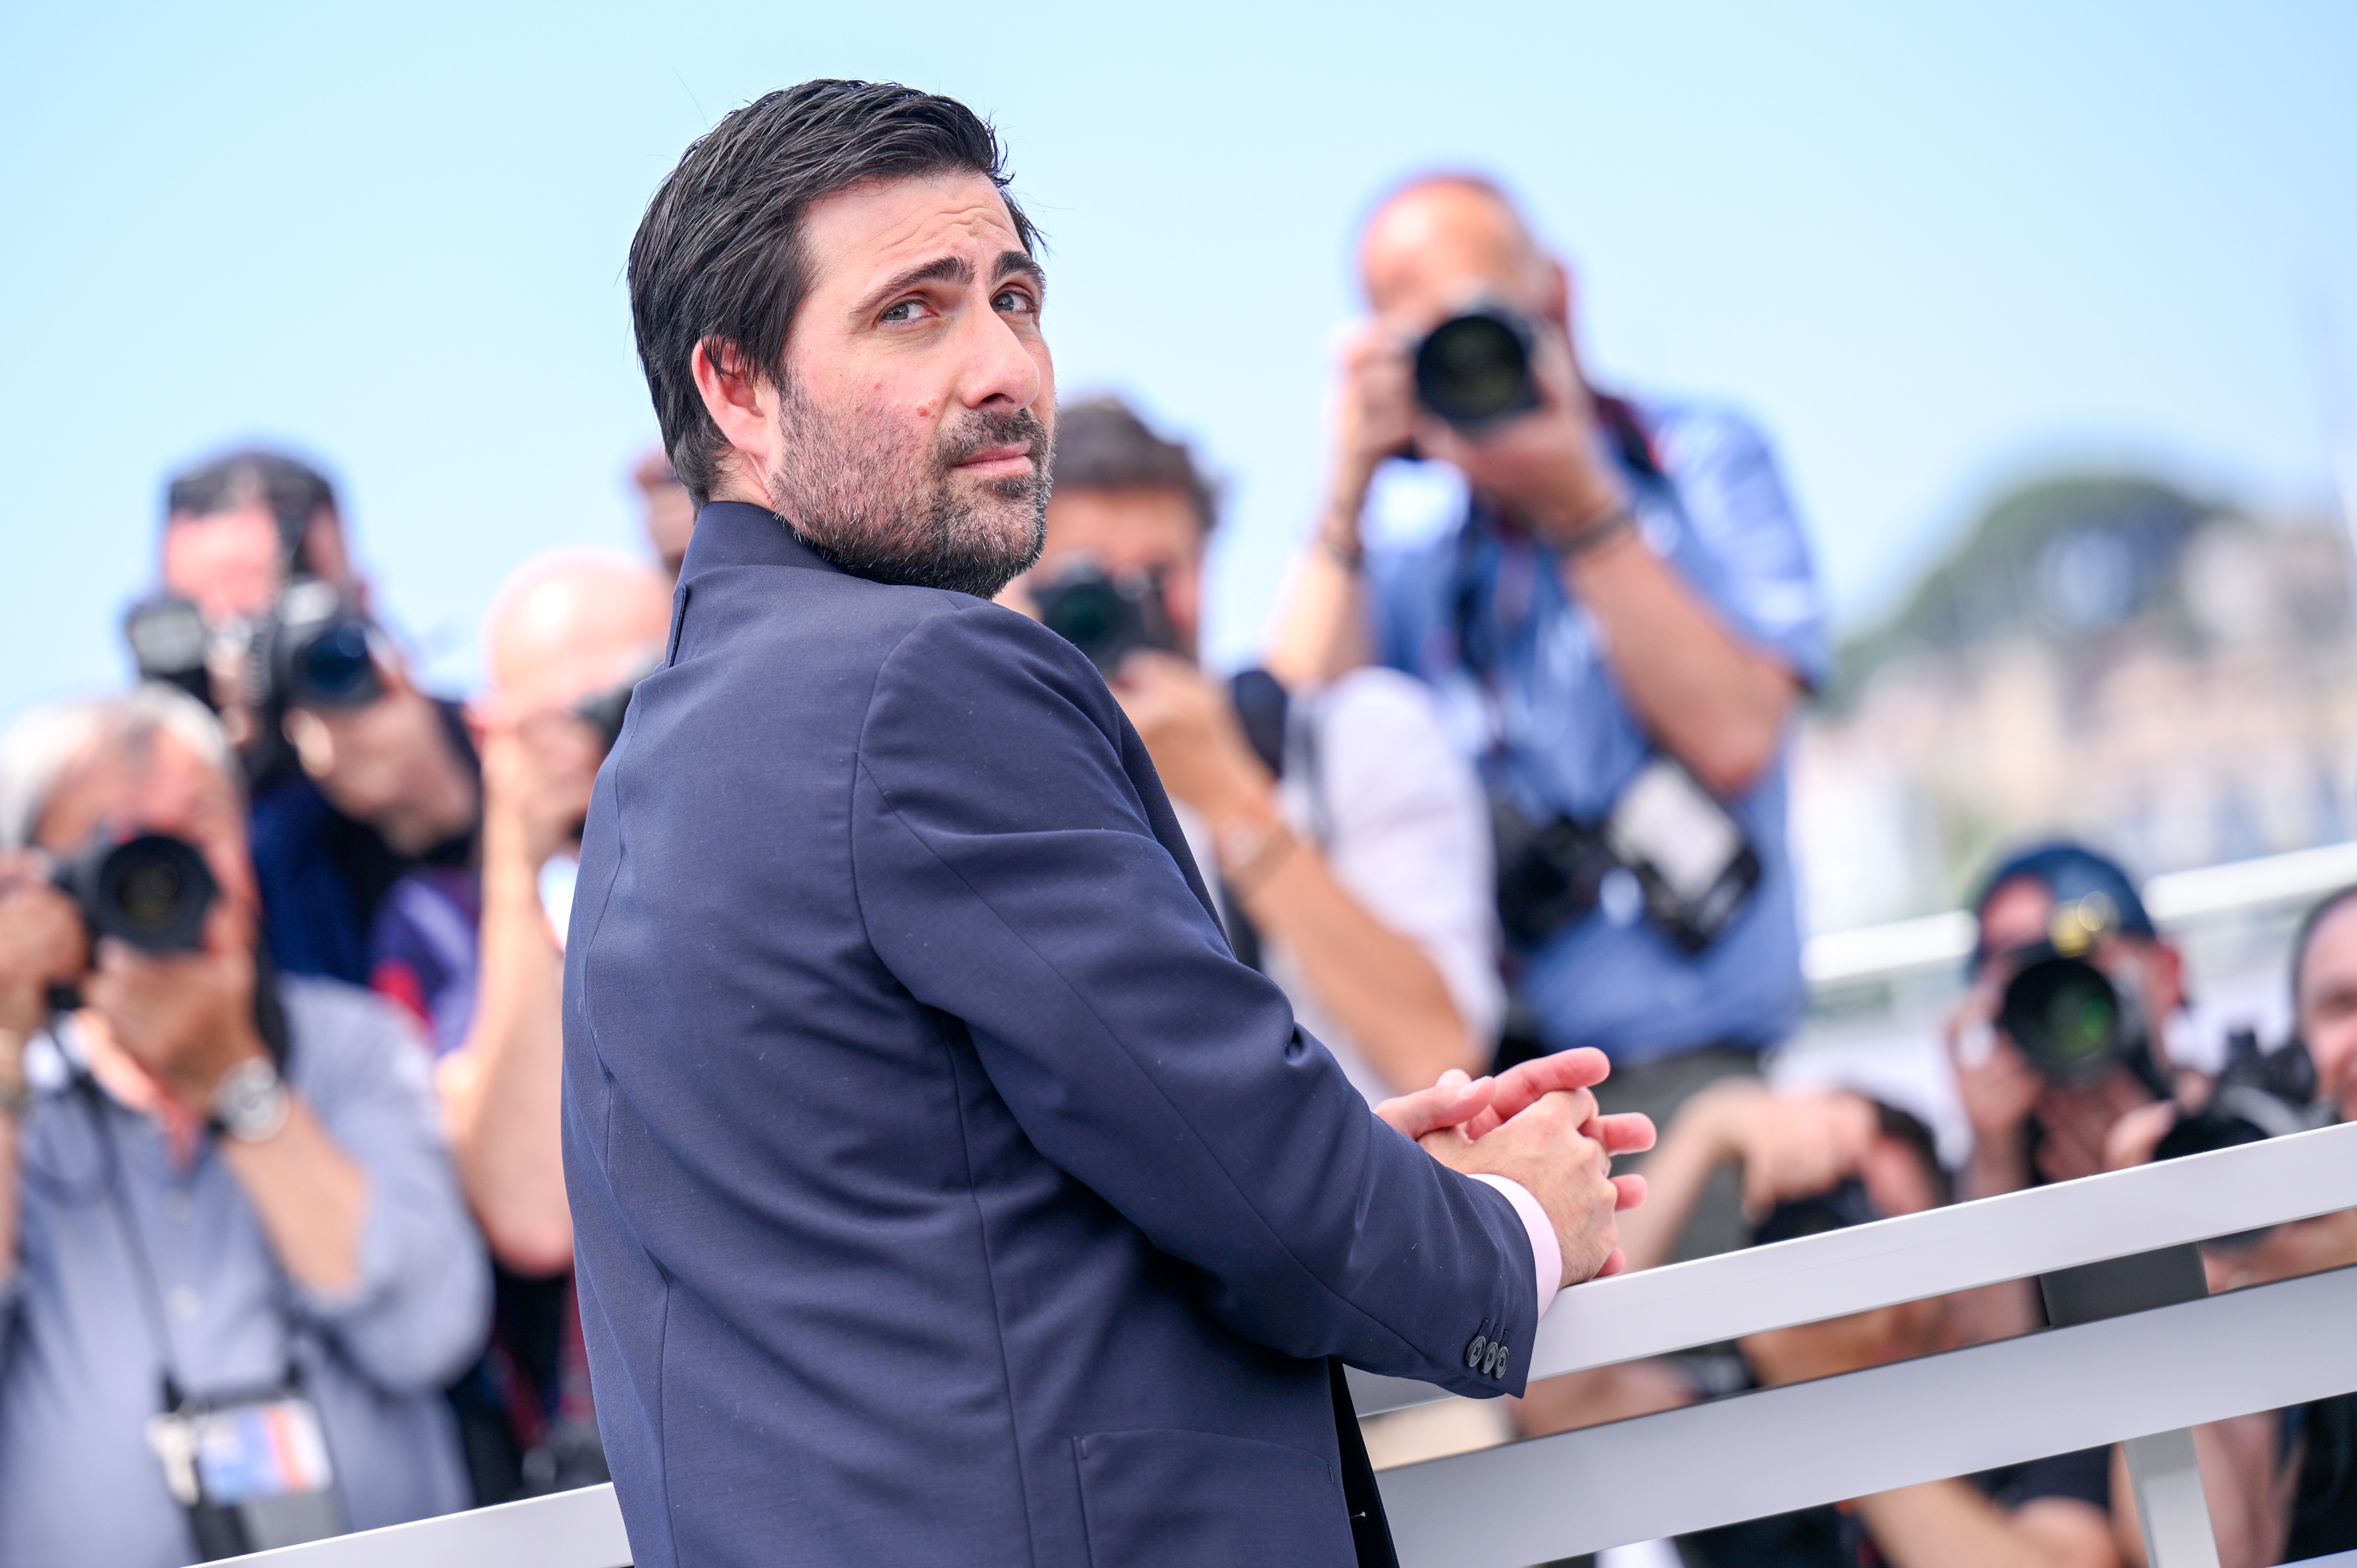 Jason Schwartzman attends the "Asteroid City" photocall at the 76th annual Cannes film festival at Palais des Festivals, on May 24, 2023, in Cannes, France. | Source: Getty Images